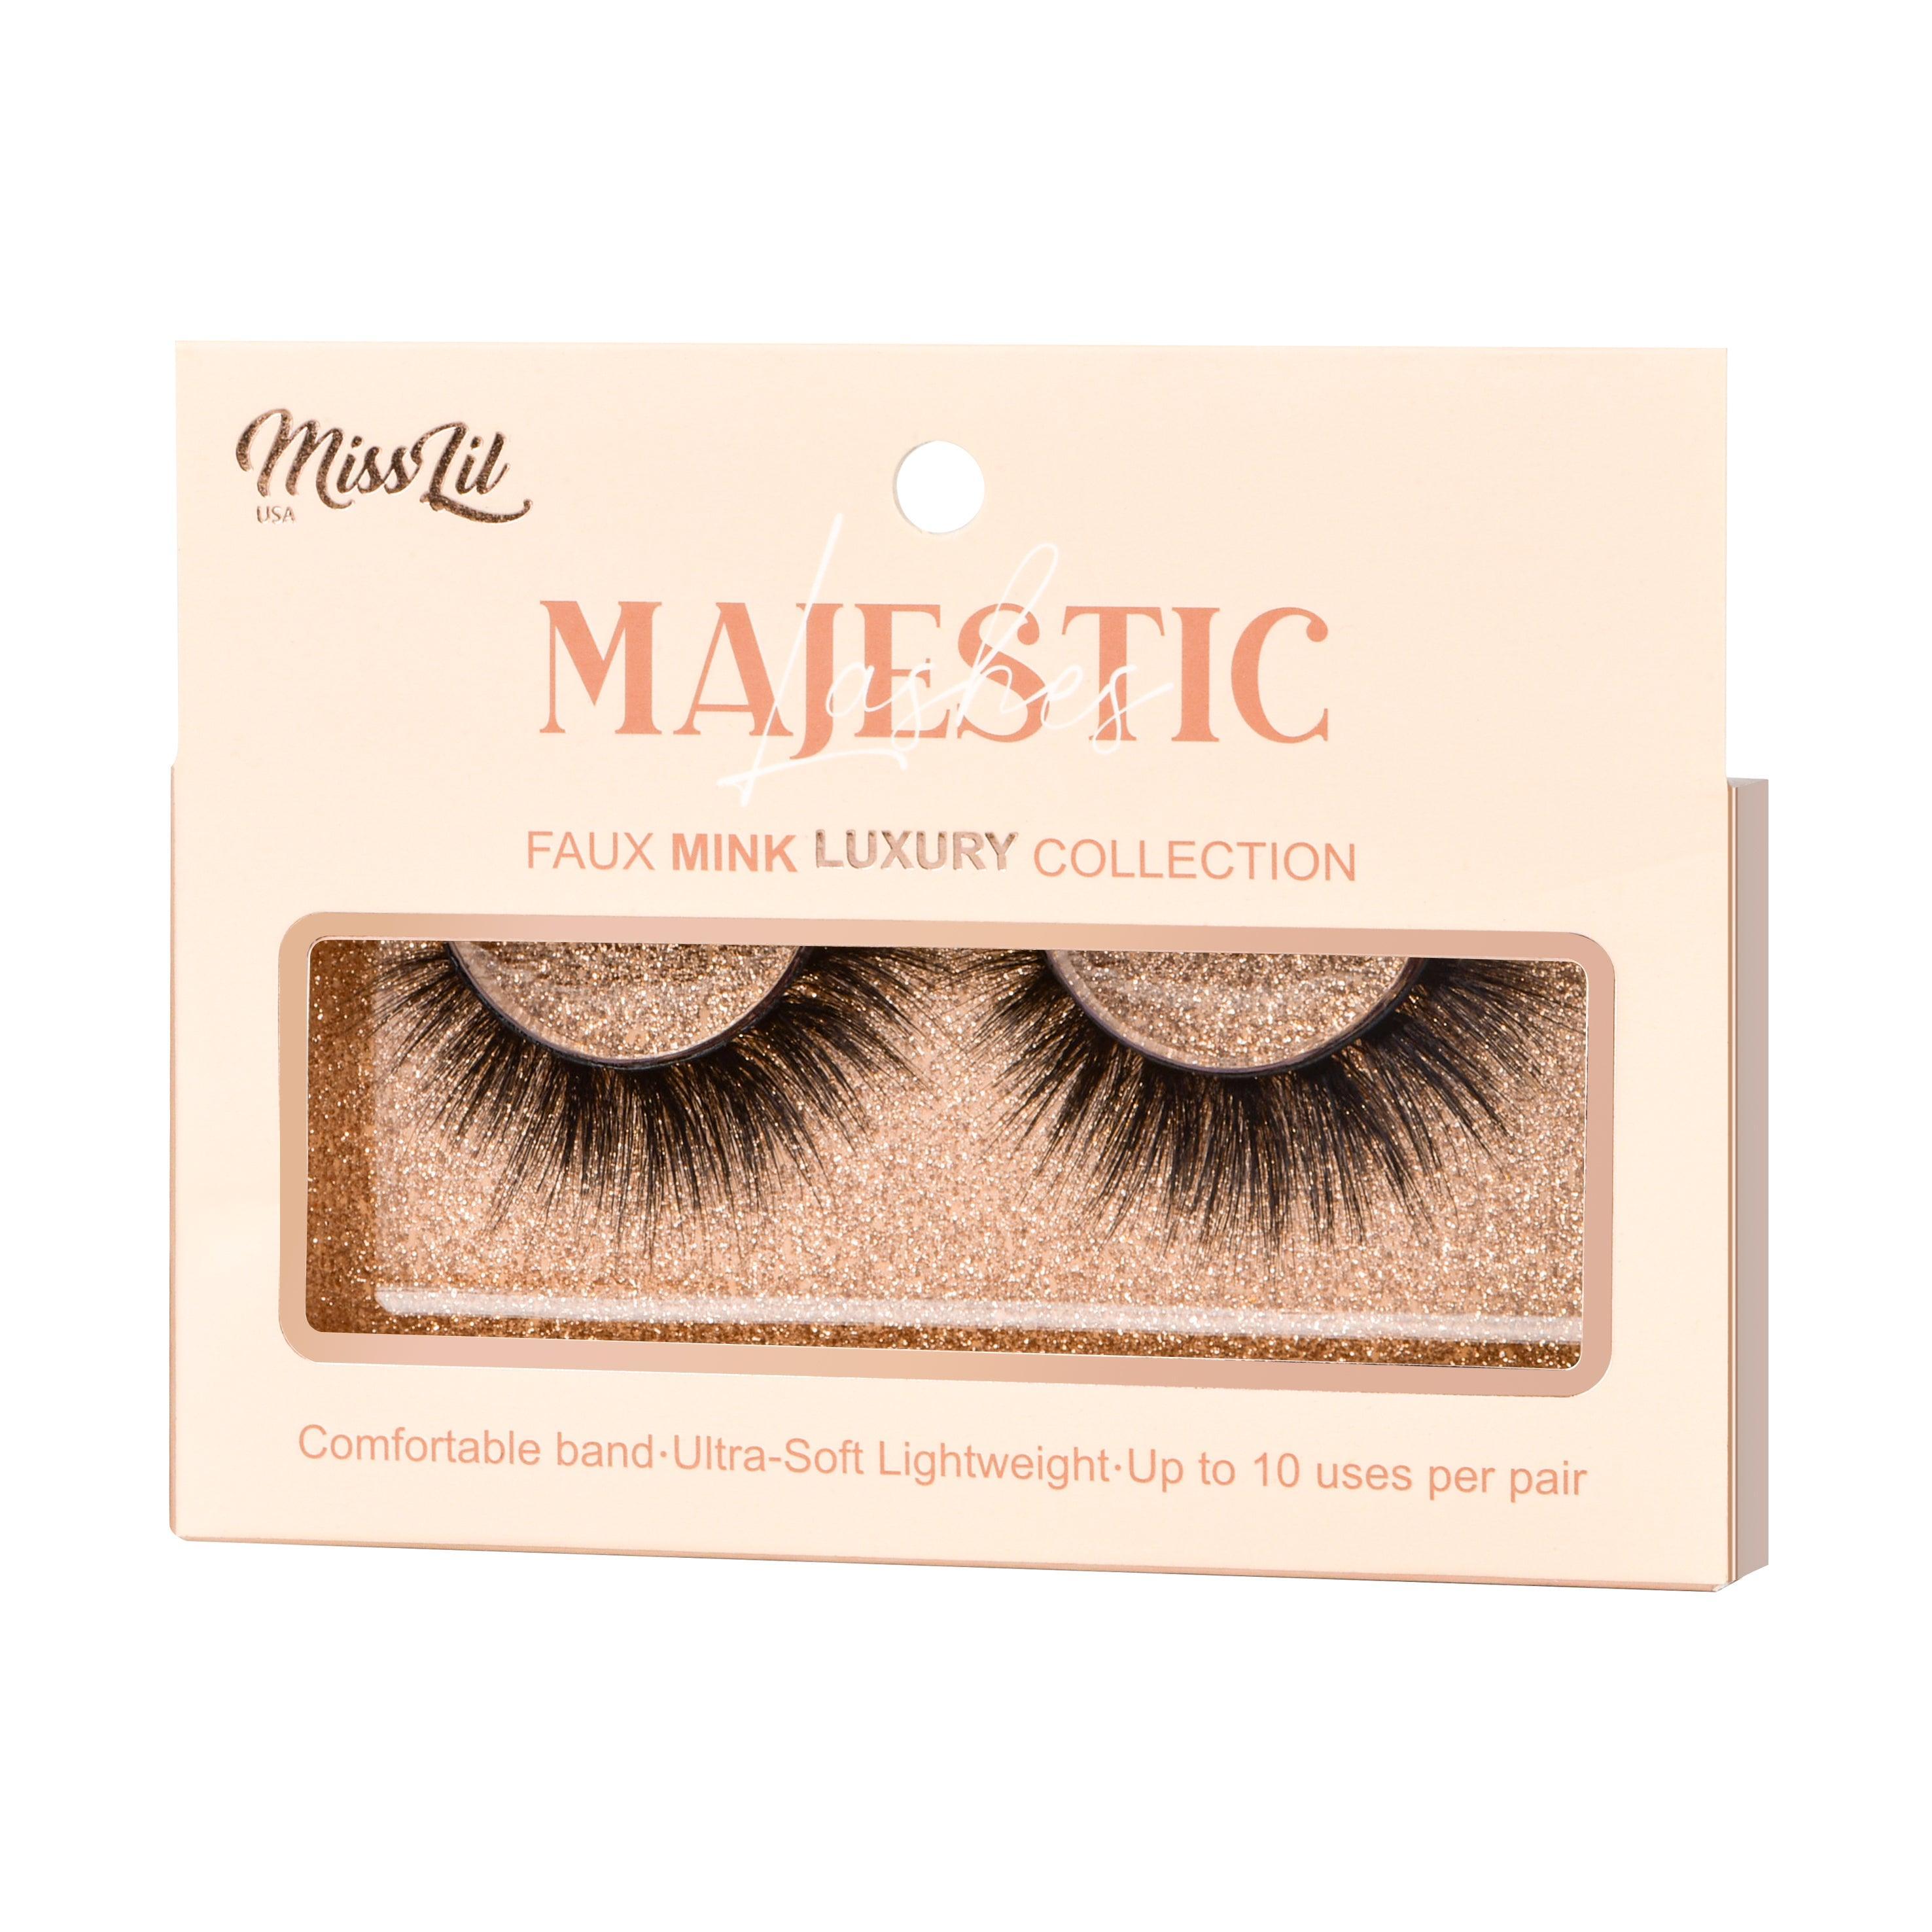 Majestic Collection 24 fake lashes - Miss Lil USA Wholesale